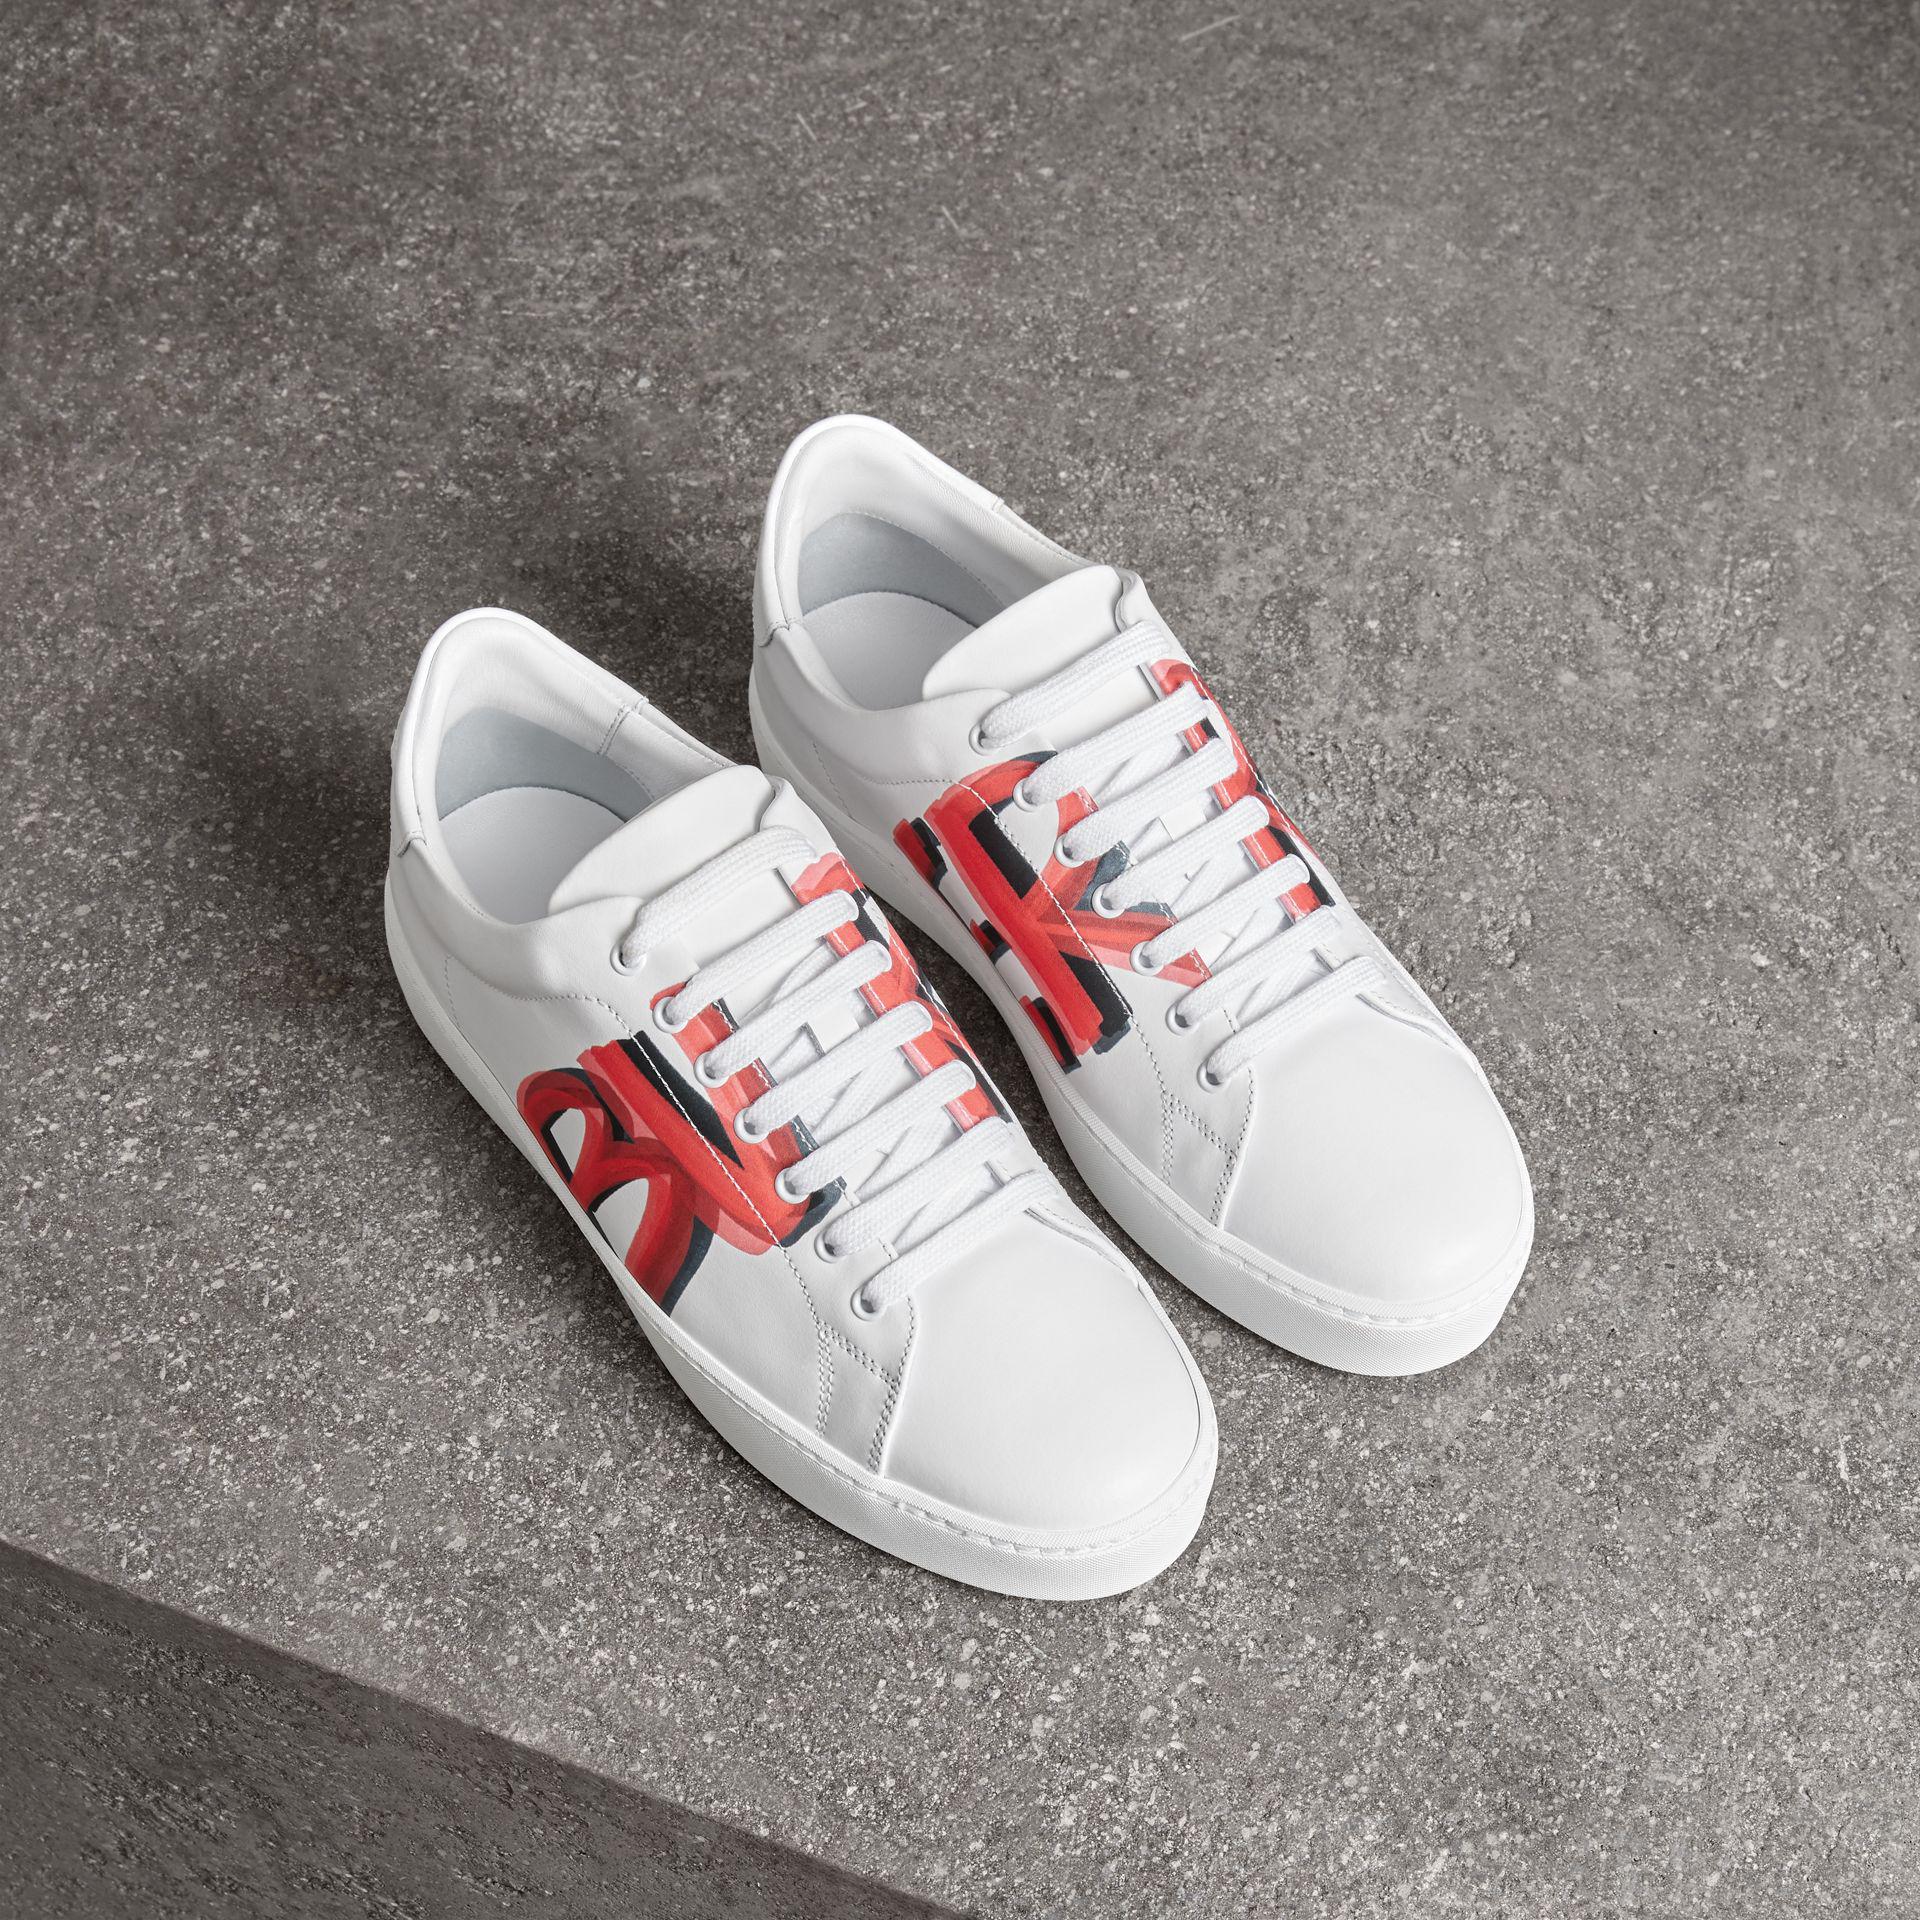 Burberry Graffiti Print Leather Sneakers | Lyst Canada